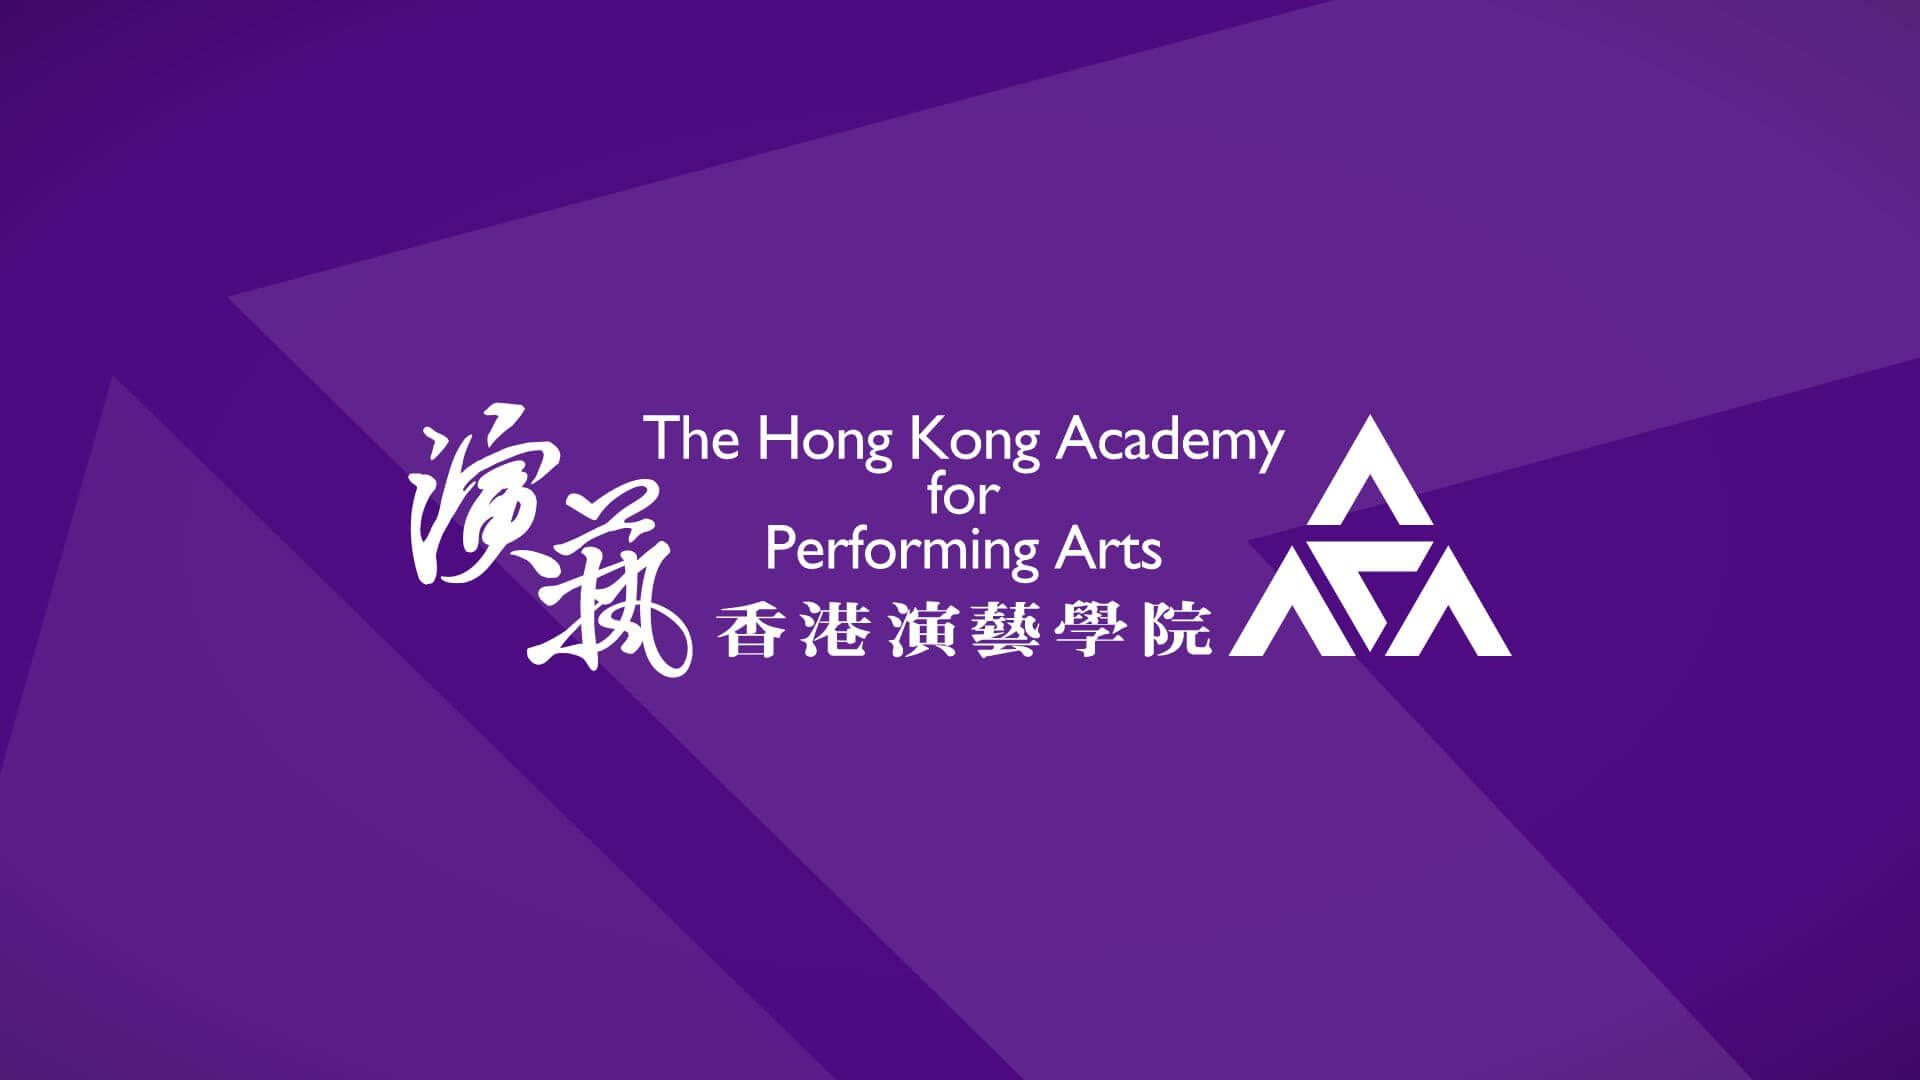 Academy Postgraduate Lecture-Demonstration by Tang Wing-kwan (Western Conducting) 